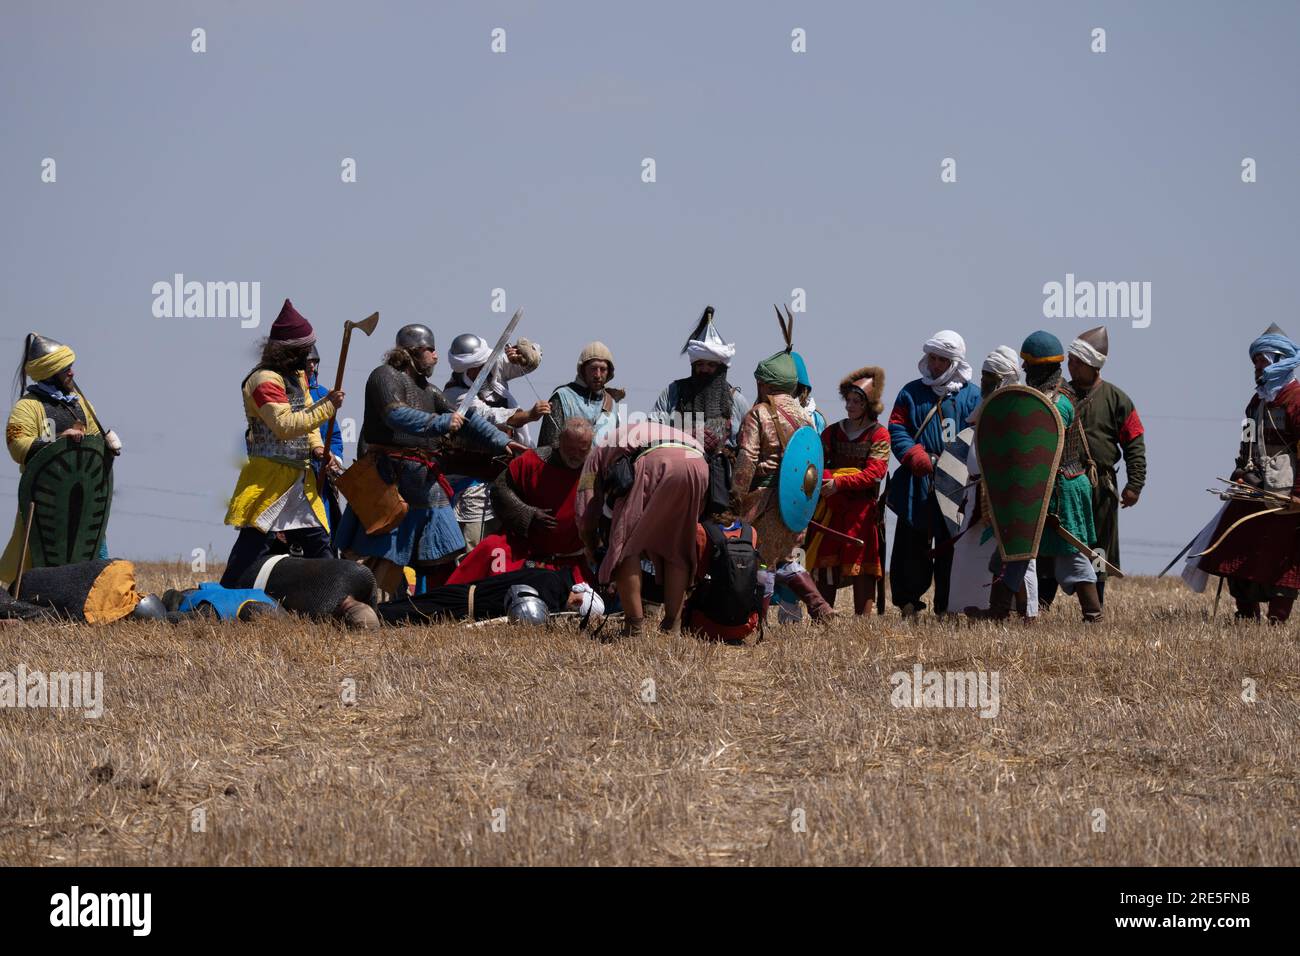 Reenactment of the Battle of Horns of Hattin.Clad in 12th century-style clothing, members of knights clubs reenacted the battle, also known as the Hor Stock Photo